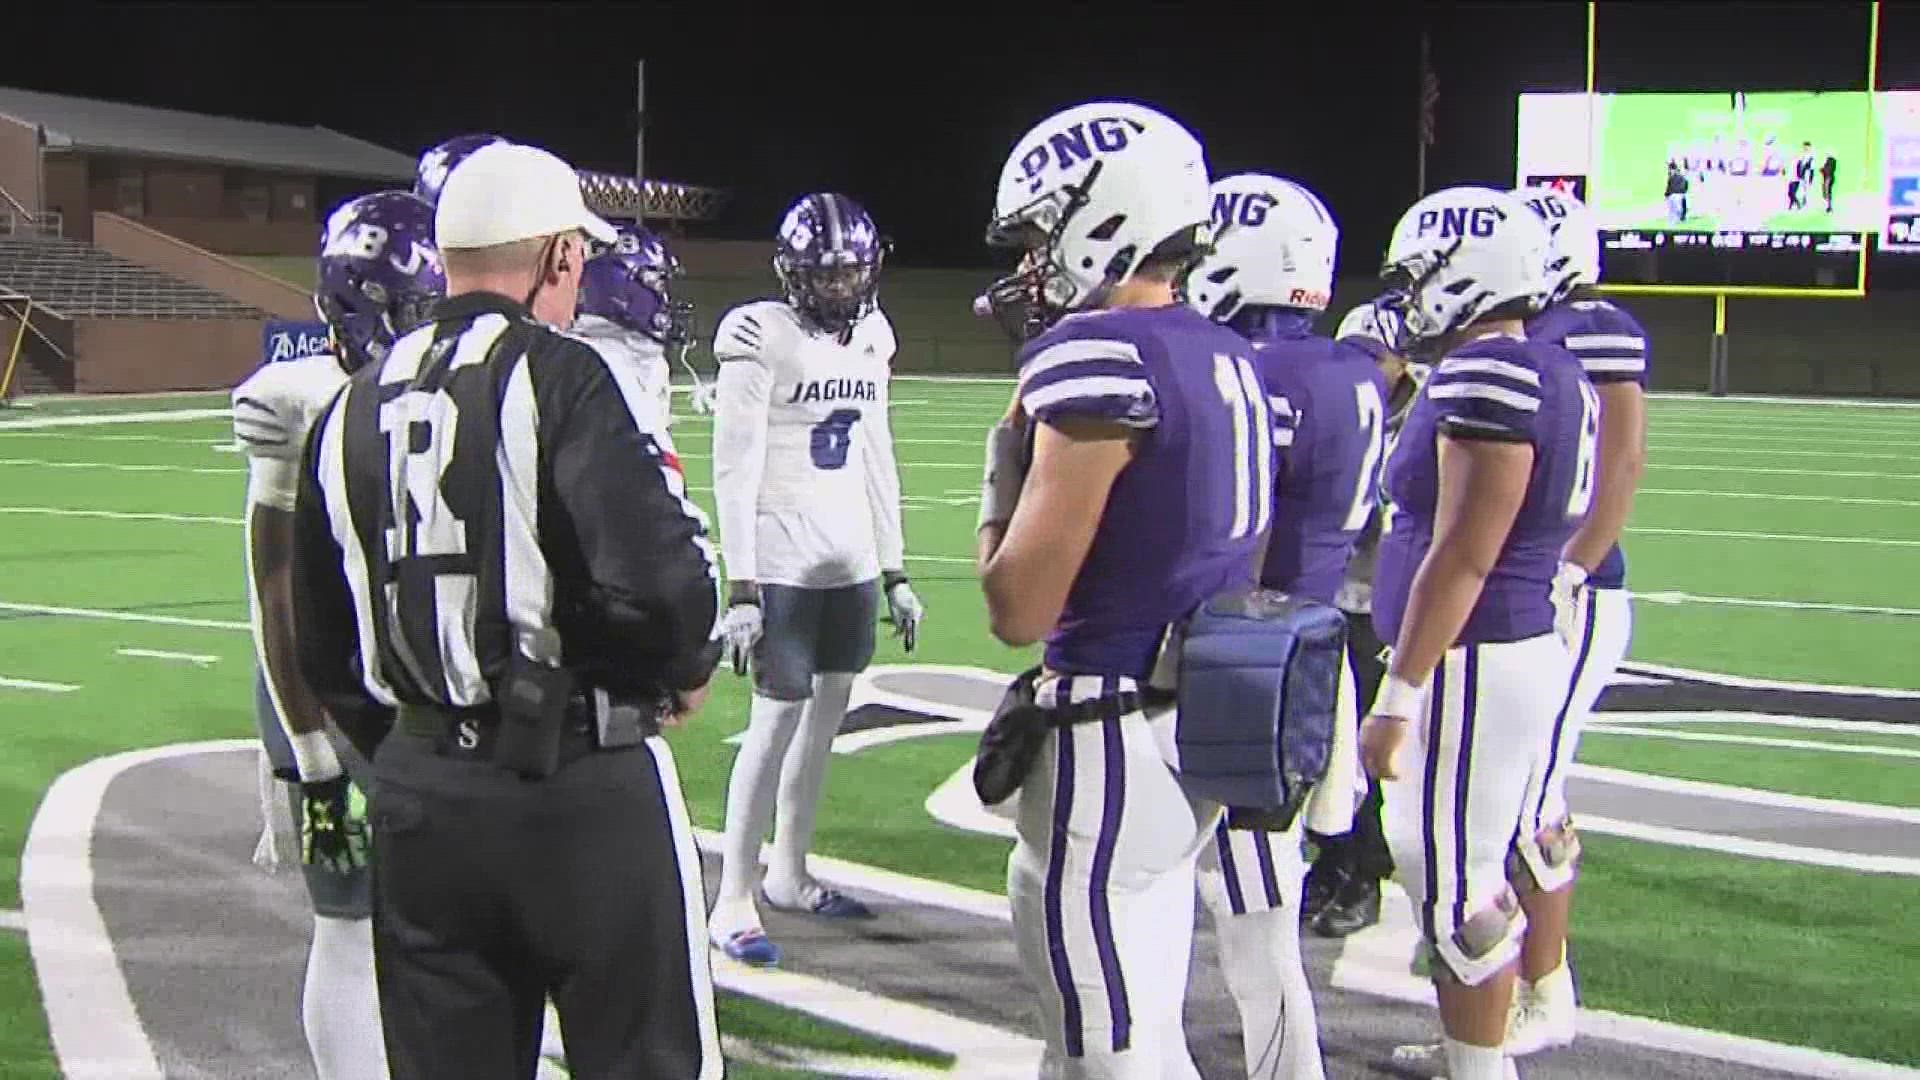 KVUE's Friday Football Fever show is back with a Central Texas playoff edition!